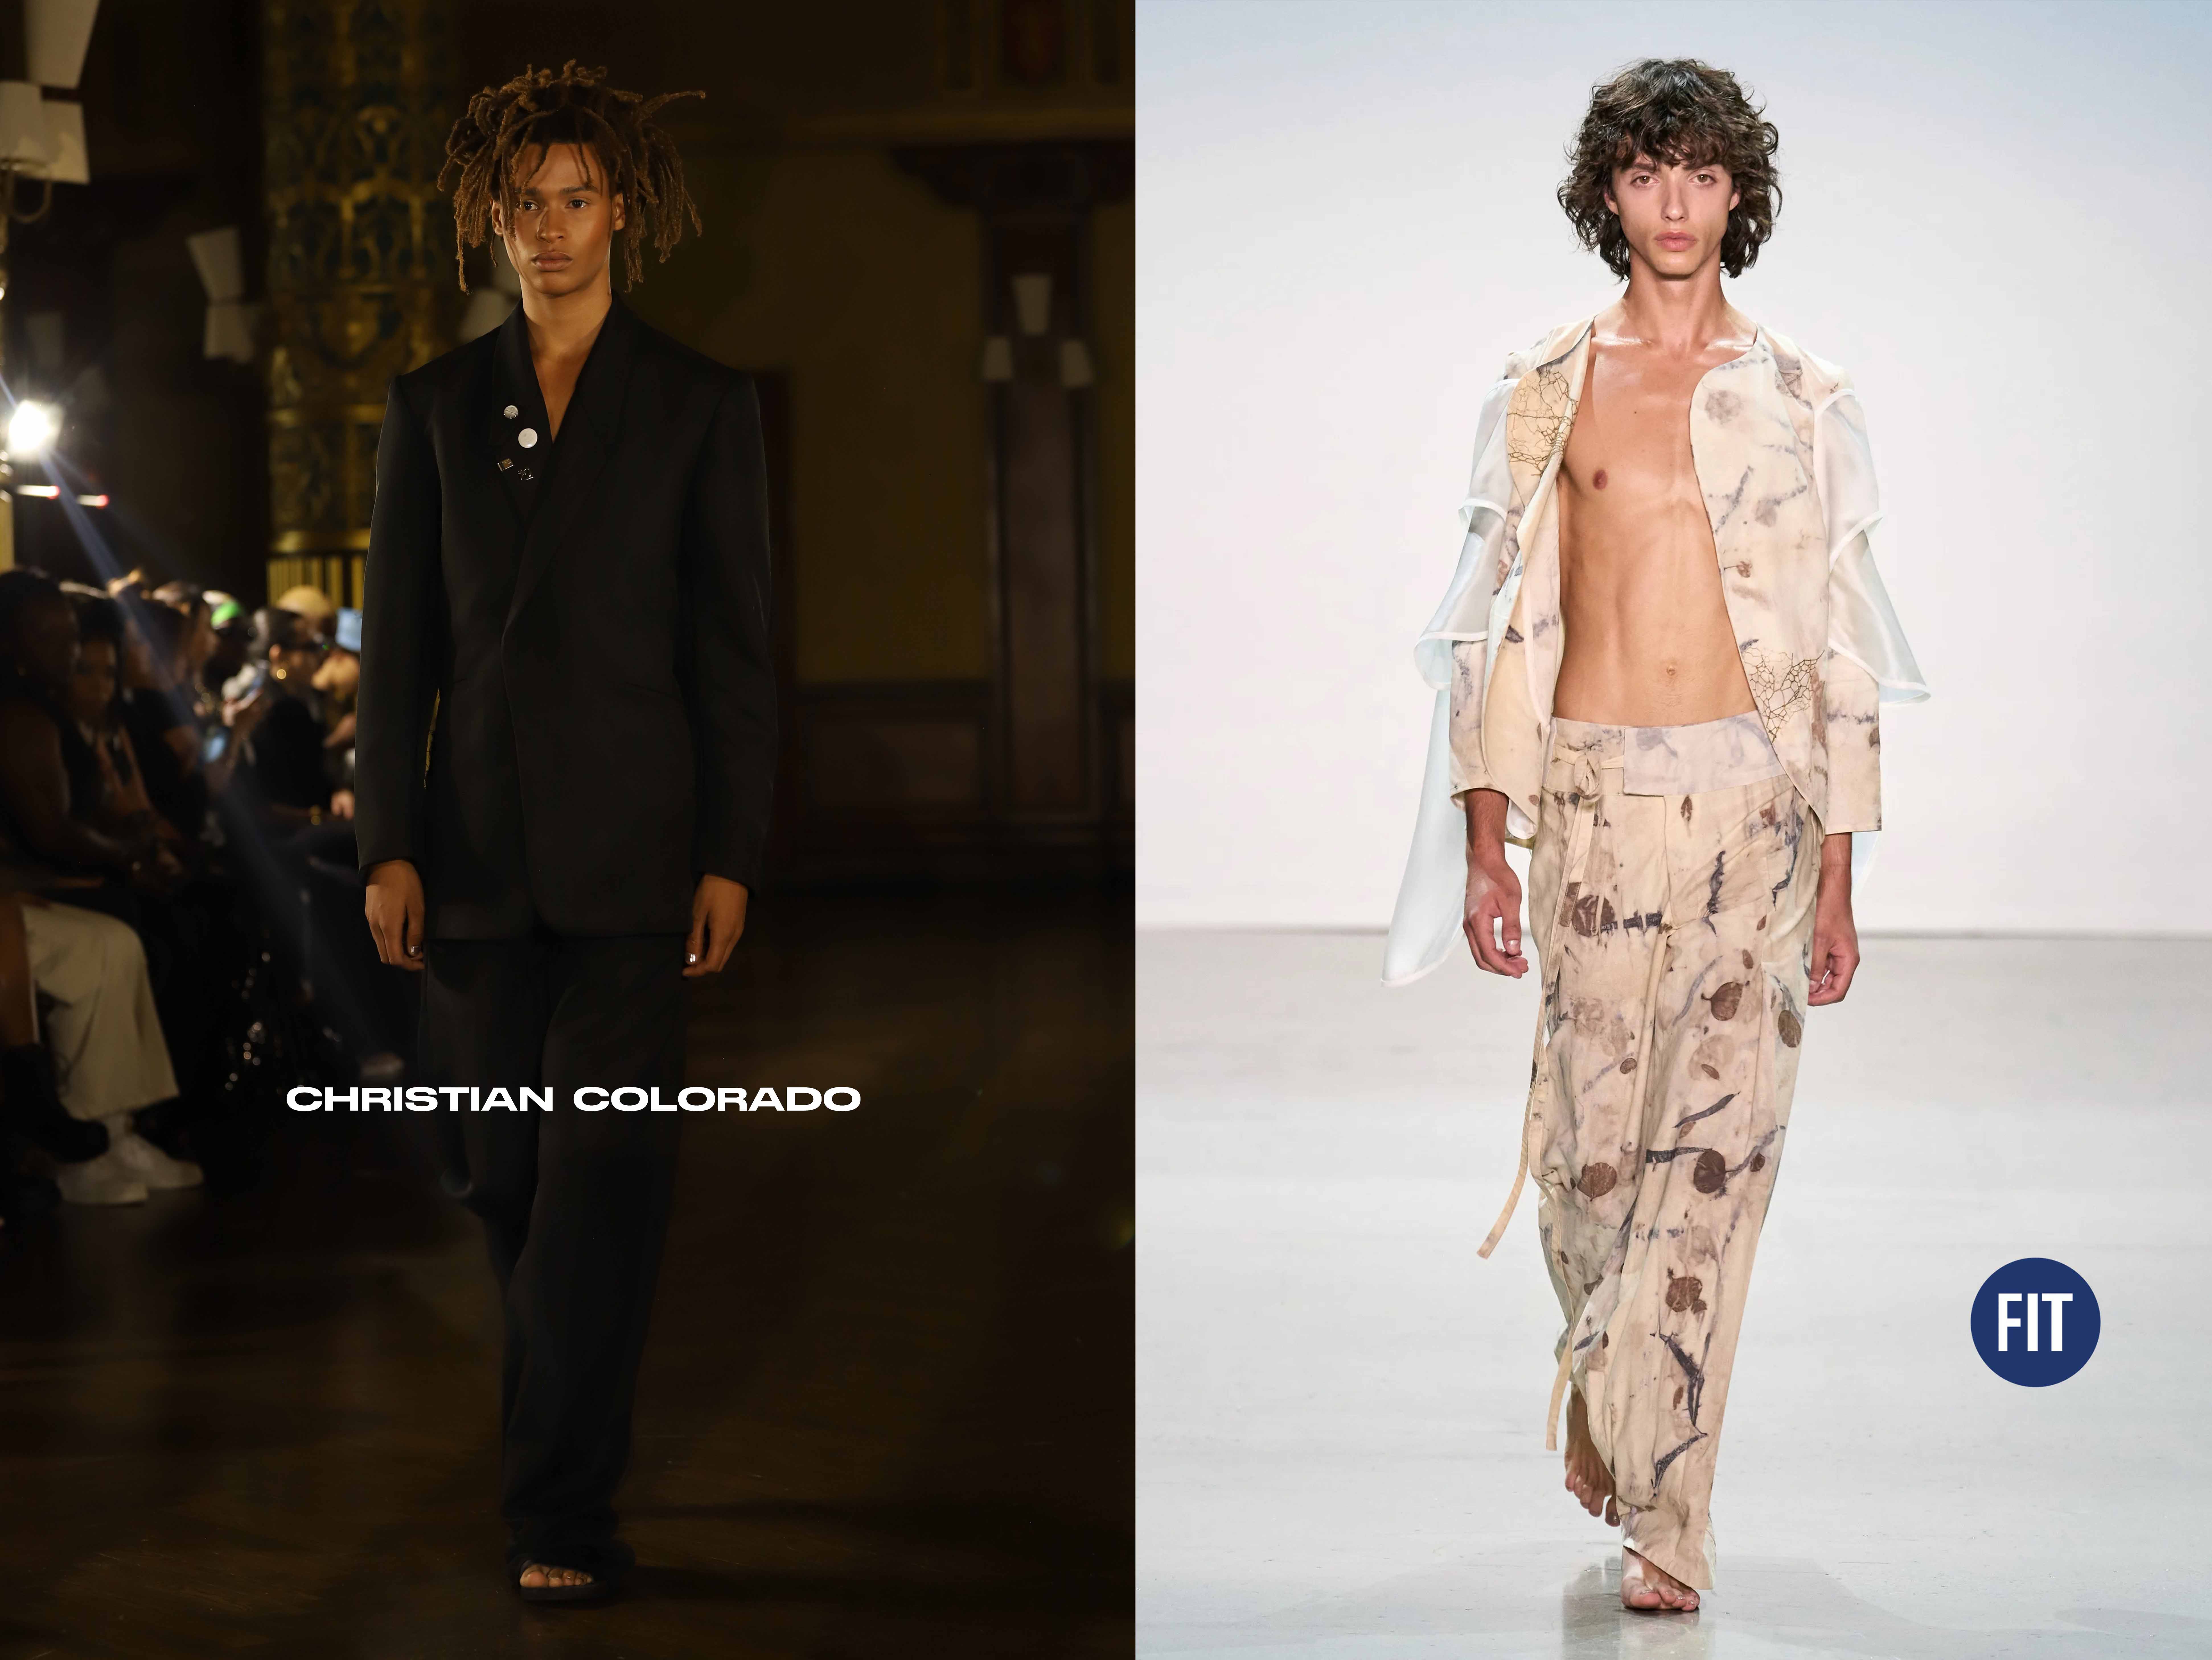 VICENTE SANTOS AND PEDRO ANGELINO FOR NEW YORK FASHION WEEK SPRING SUMMER 24